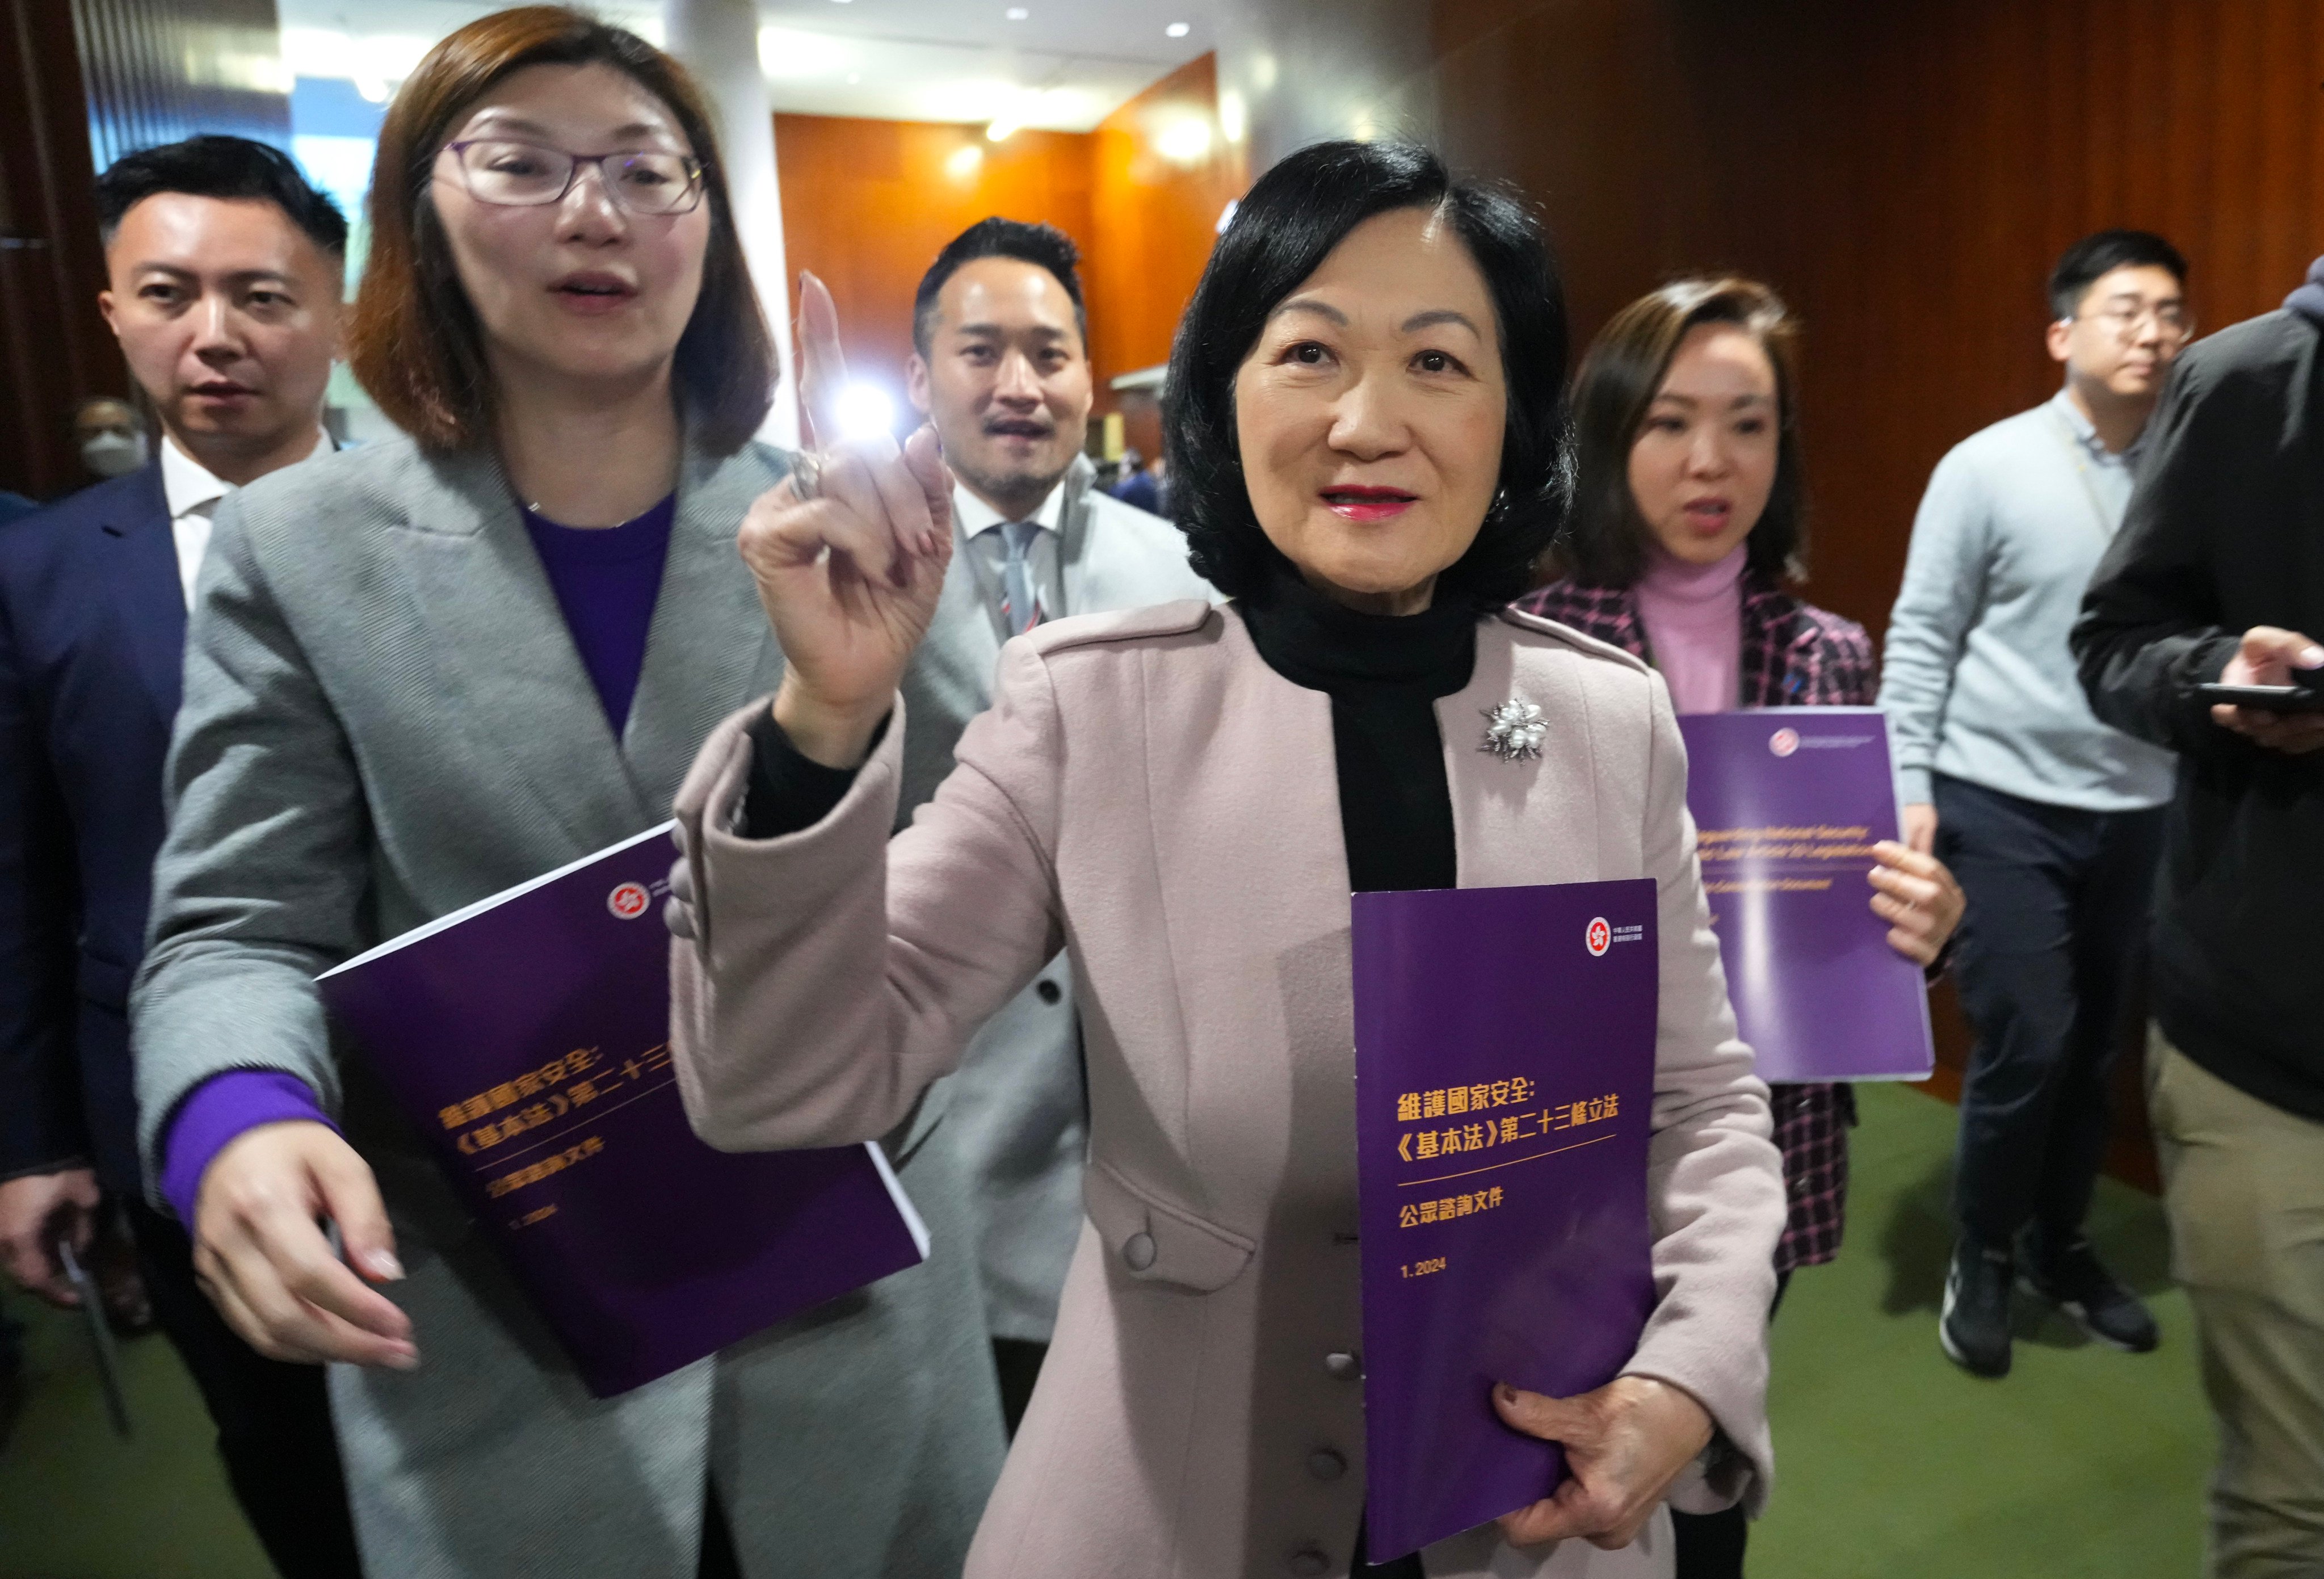 Top government adviser Regina Ip (centre) says foreign countries have a wrong impression that “one country, two systems” will disappear once the law is passed. Photo: Sam Tsang